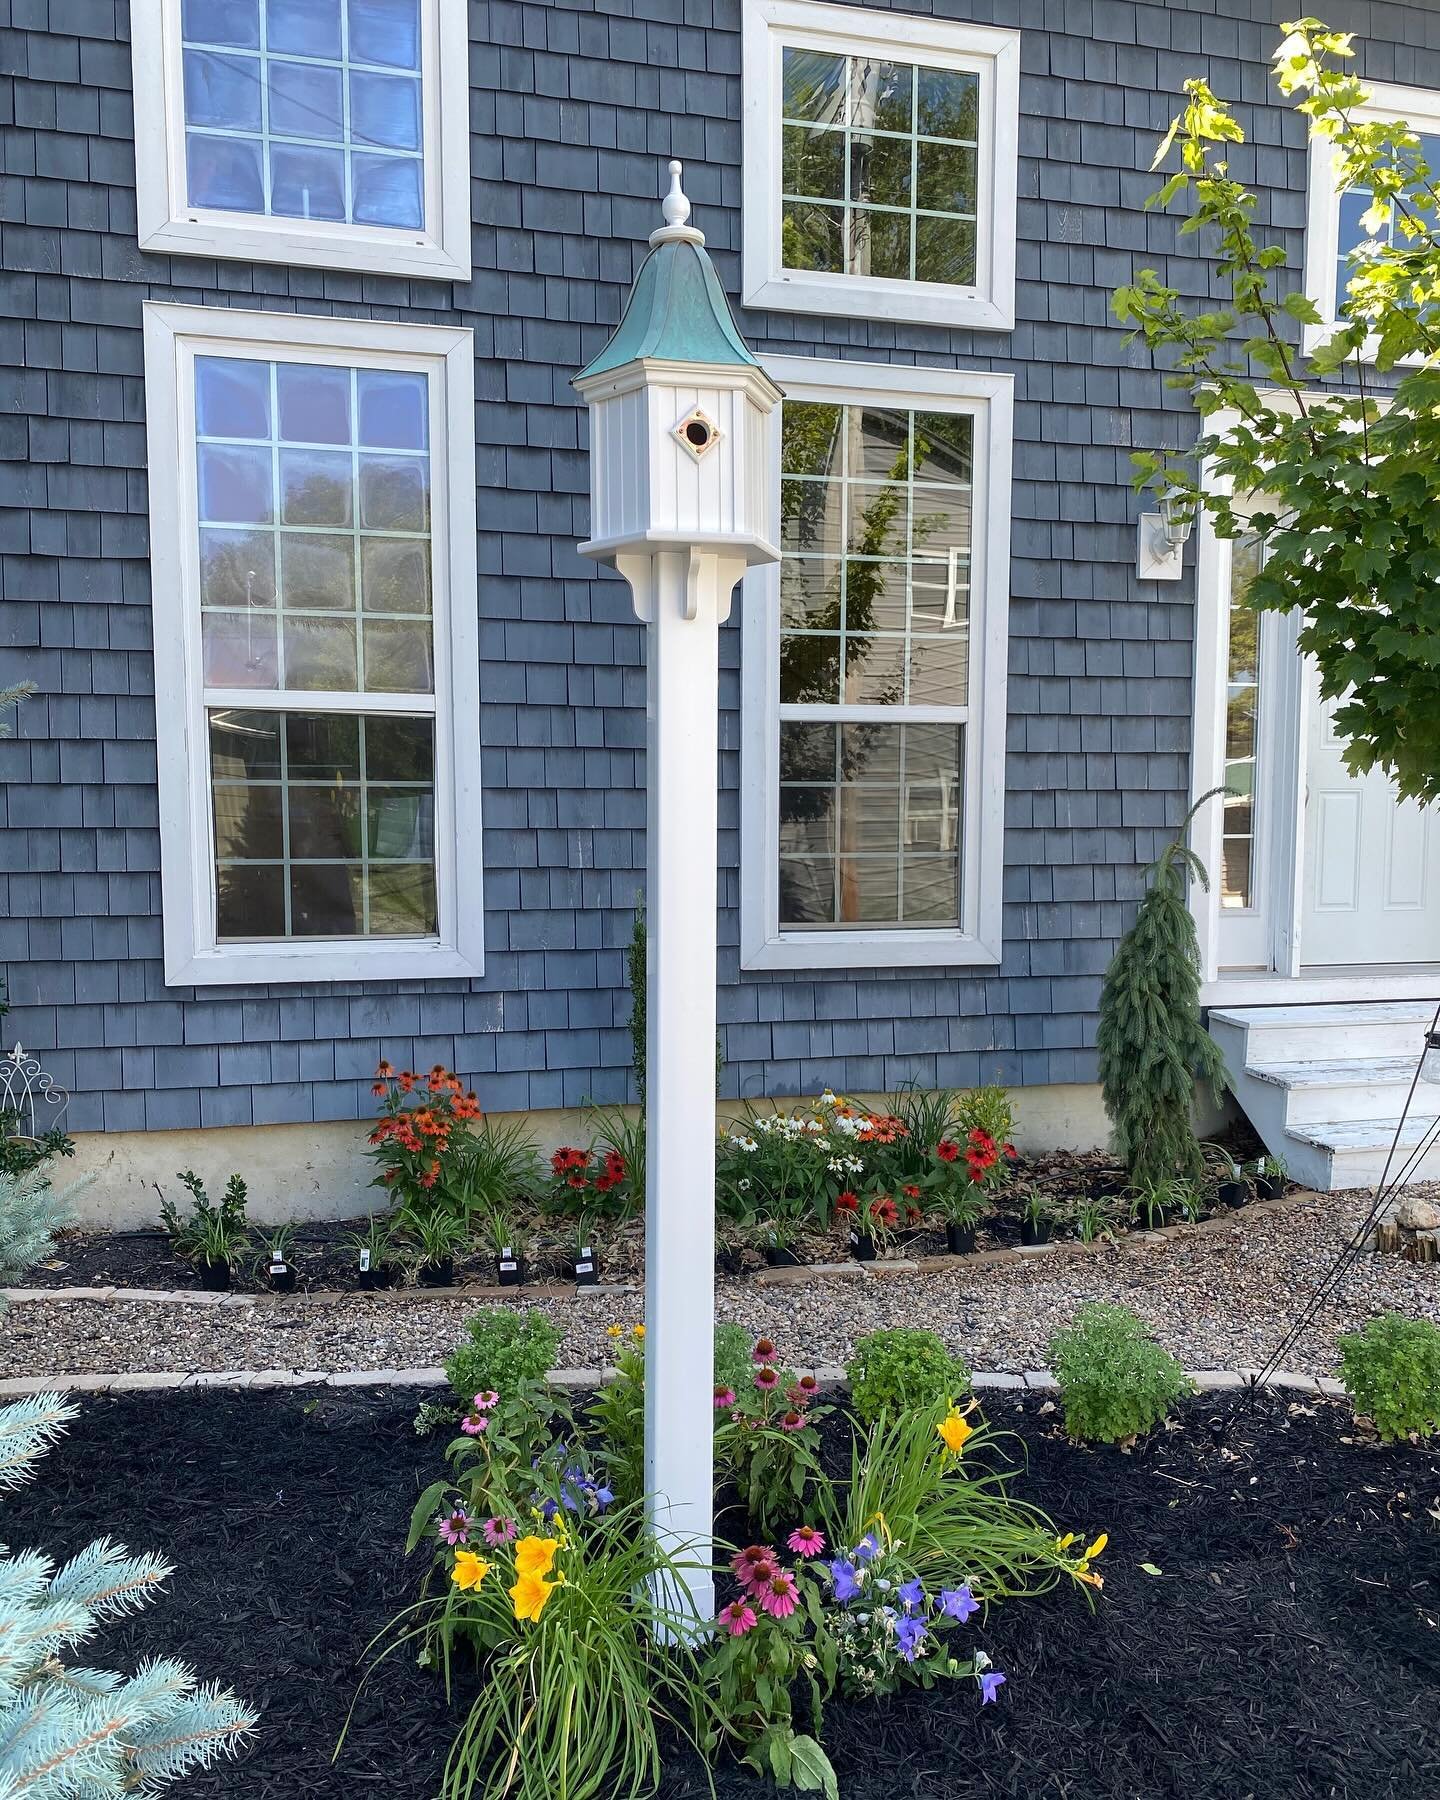 Mother&rsquo;s Day is this Sunday! Have you gotten a gift? Fancy houses are always a great choice! Come see us to find one that&rsquo;s right for your favorite mom! We&rsquo;re open 10-5 🐦 

#mothersday #fancyhouse #birdhouses #giftshopping #wildbir